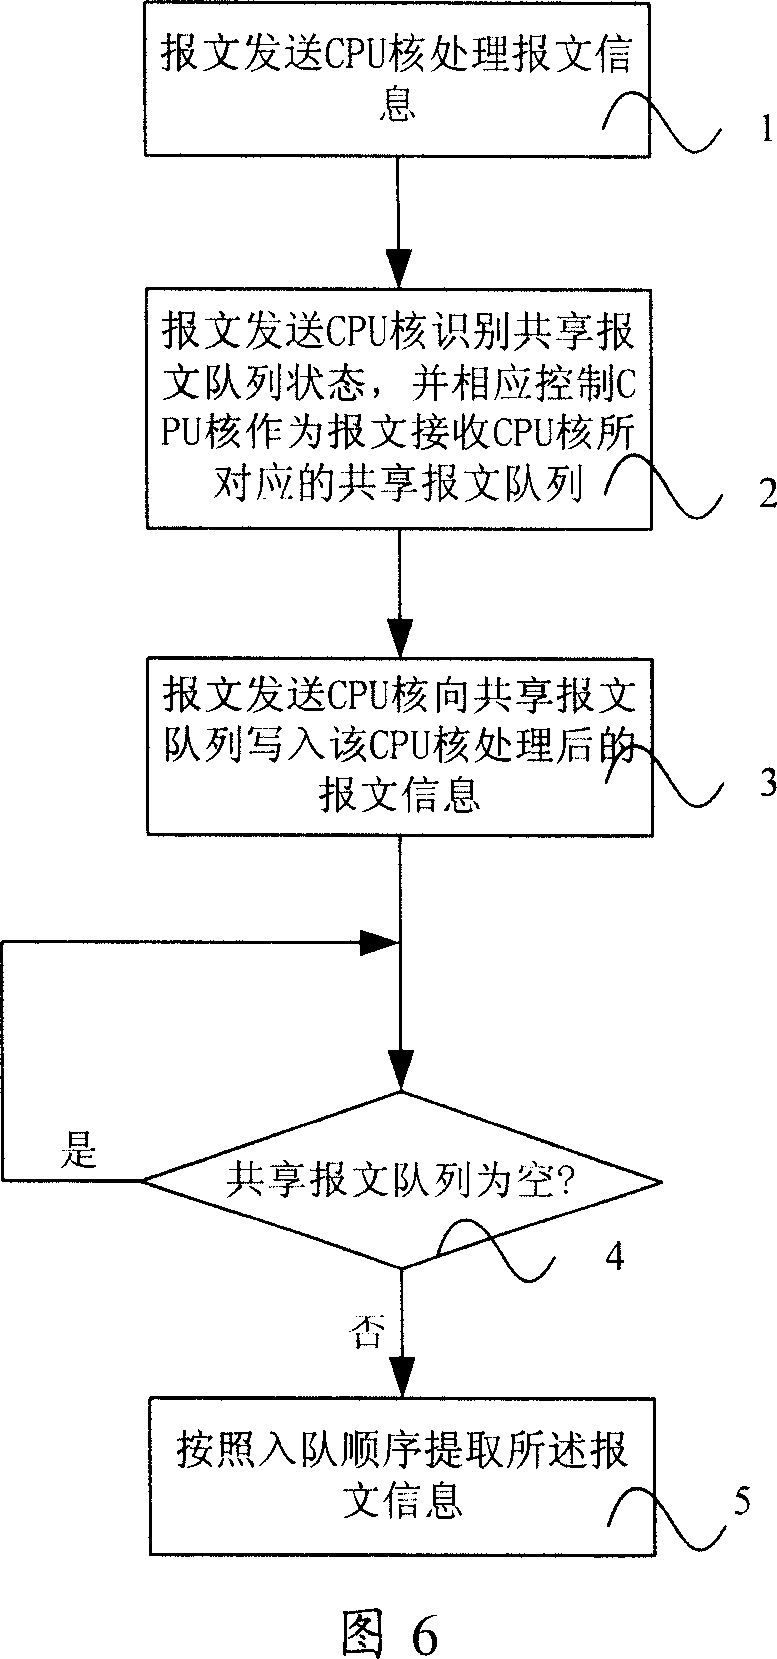 System and method for implementing packet combined treatment by multi-core CPU